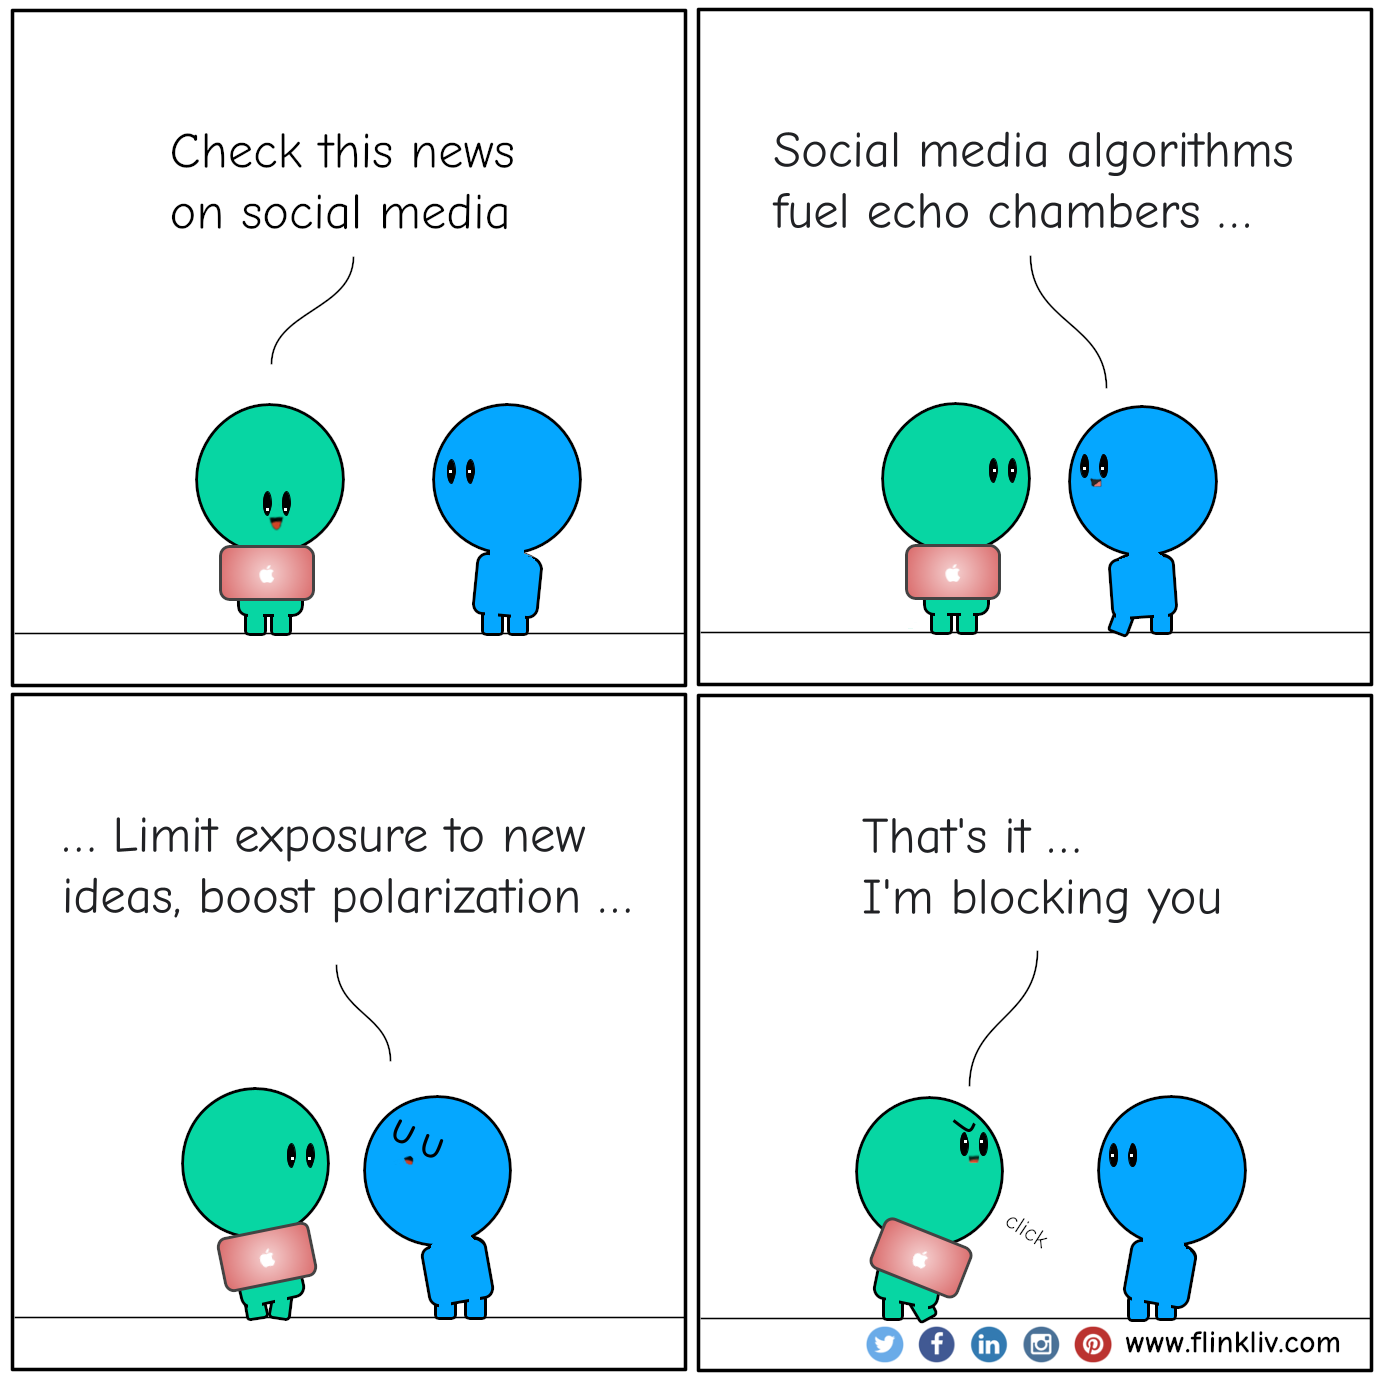 Conversation between A and B about echo chamber. 
				A: Check this news on social media
				B: Social media algorithms fuel echo chambers, limit new ideas, and boost polarization.
				A: That's it, I'm blocking you
				By Flinkliv.com